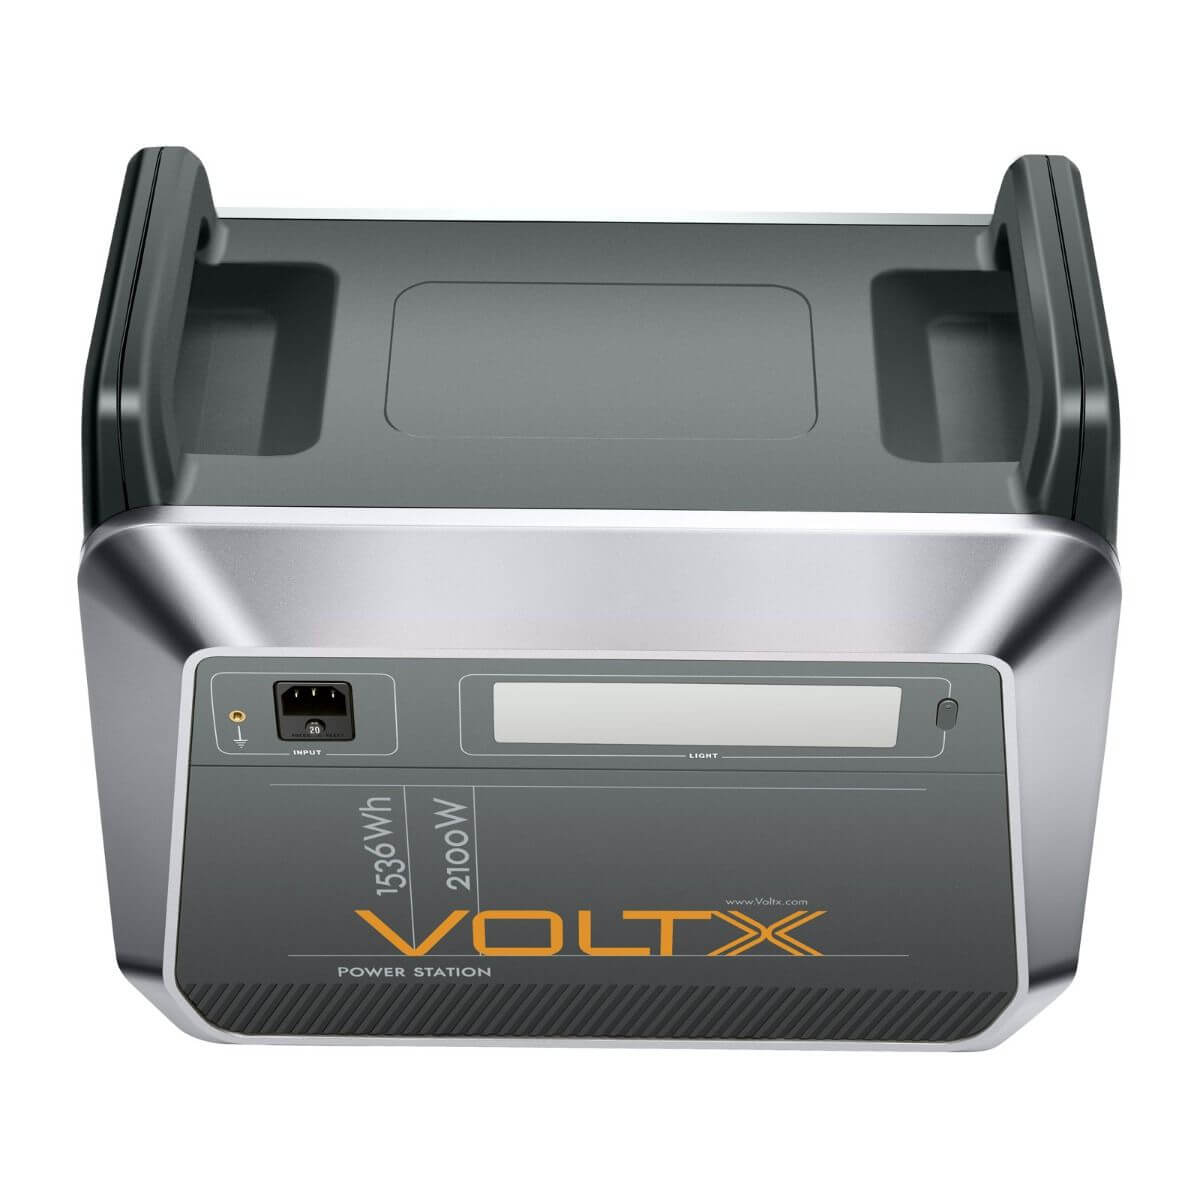 VOLTX 2100W PORTABLE POWER STATION 1536WH SOLAR GENERATOR BACKUP FAST CHARGE